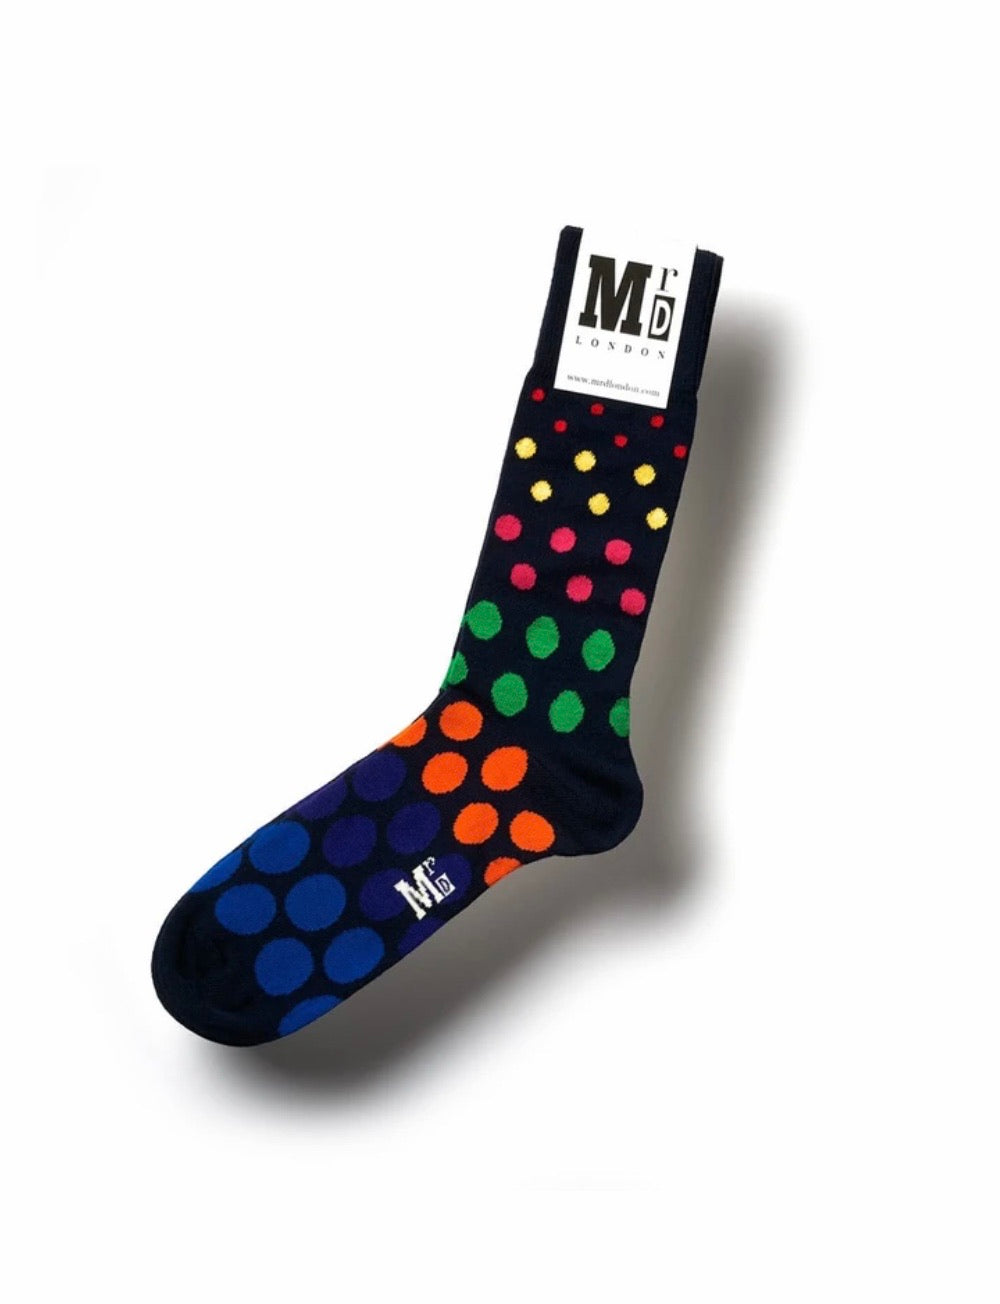 Quirky Mr D London Socks - Design Spotted